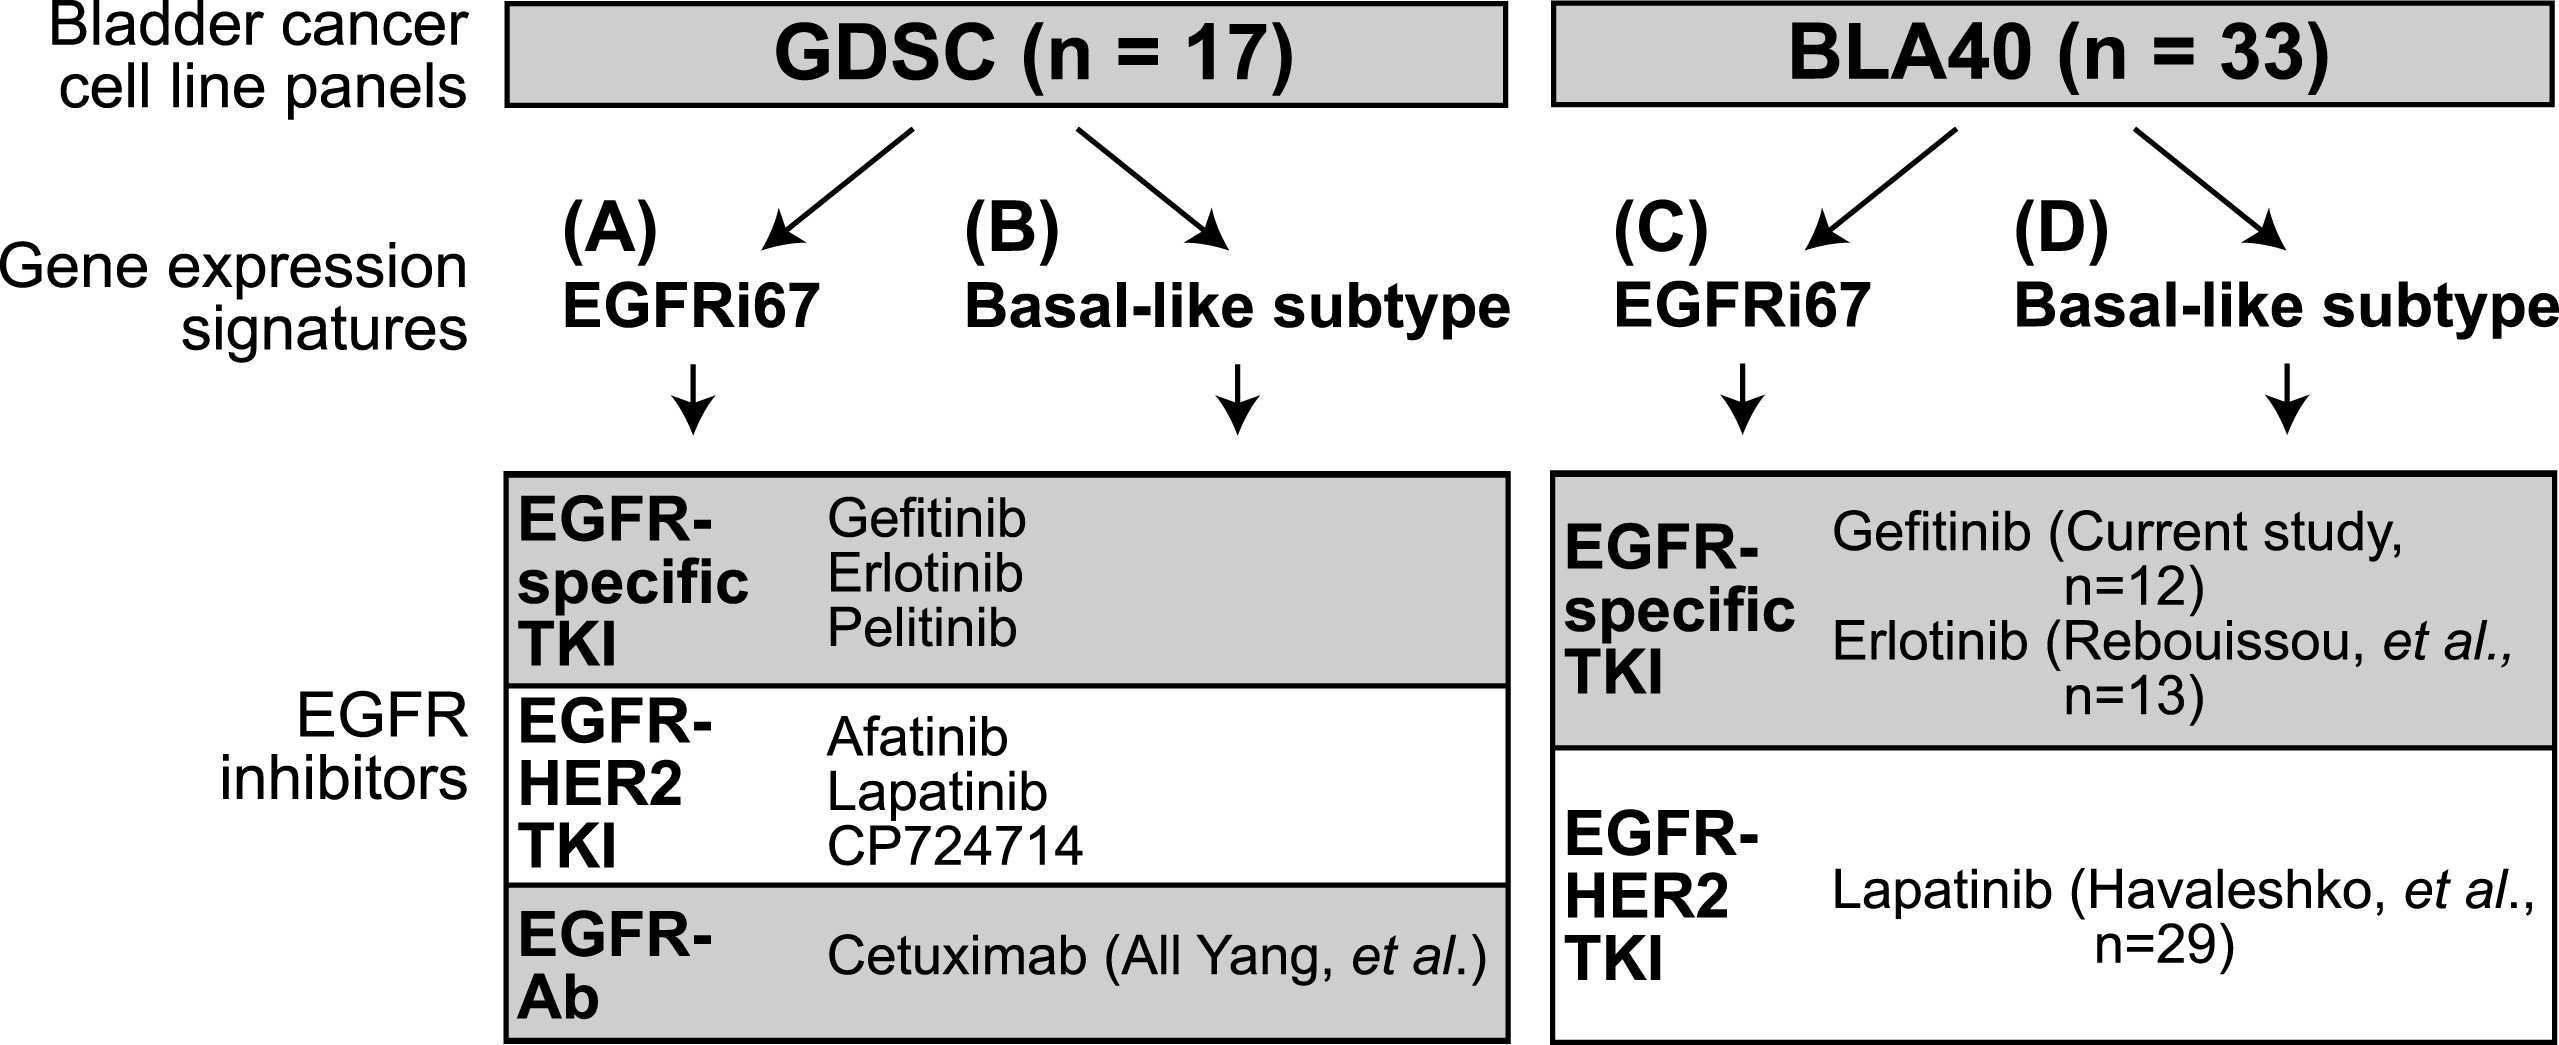 Experimental outline of the study. Two bladder cancer cell line panels were classified using gene expression signatures. The EGFRi67 was applied to the (A) GDSC and the (C) BLA40 to predict EGFR sensitivity. Two subtype gene expression signatures were used to identify basal-like bladder cancer cell lines in the (B) GDSC and (D) BLA40. Each classification was then compared to the responses of the listed EGFR inhibitors.